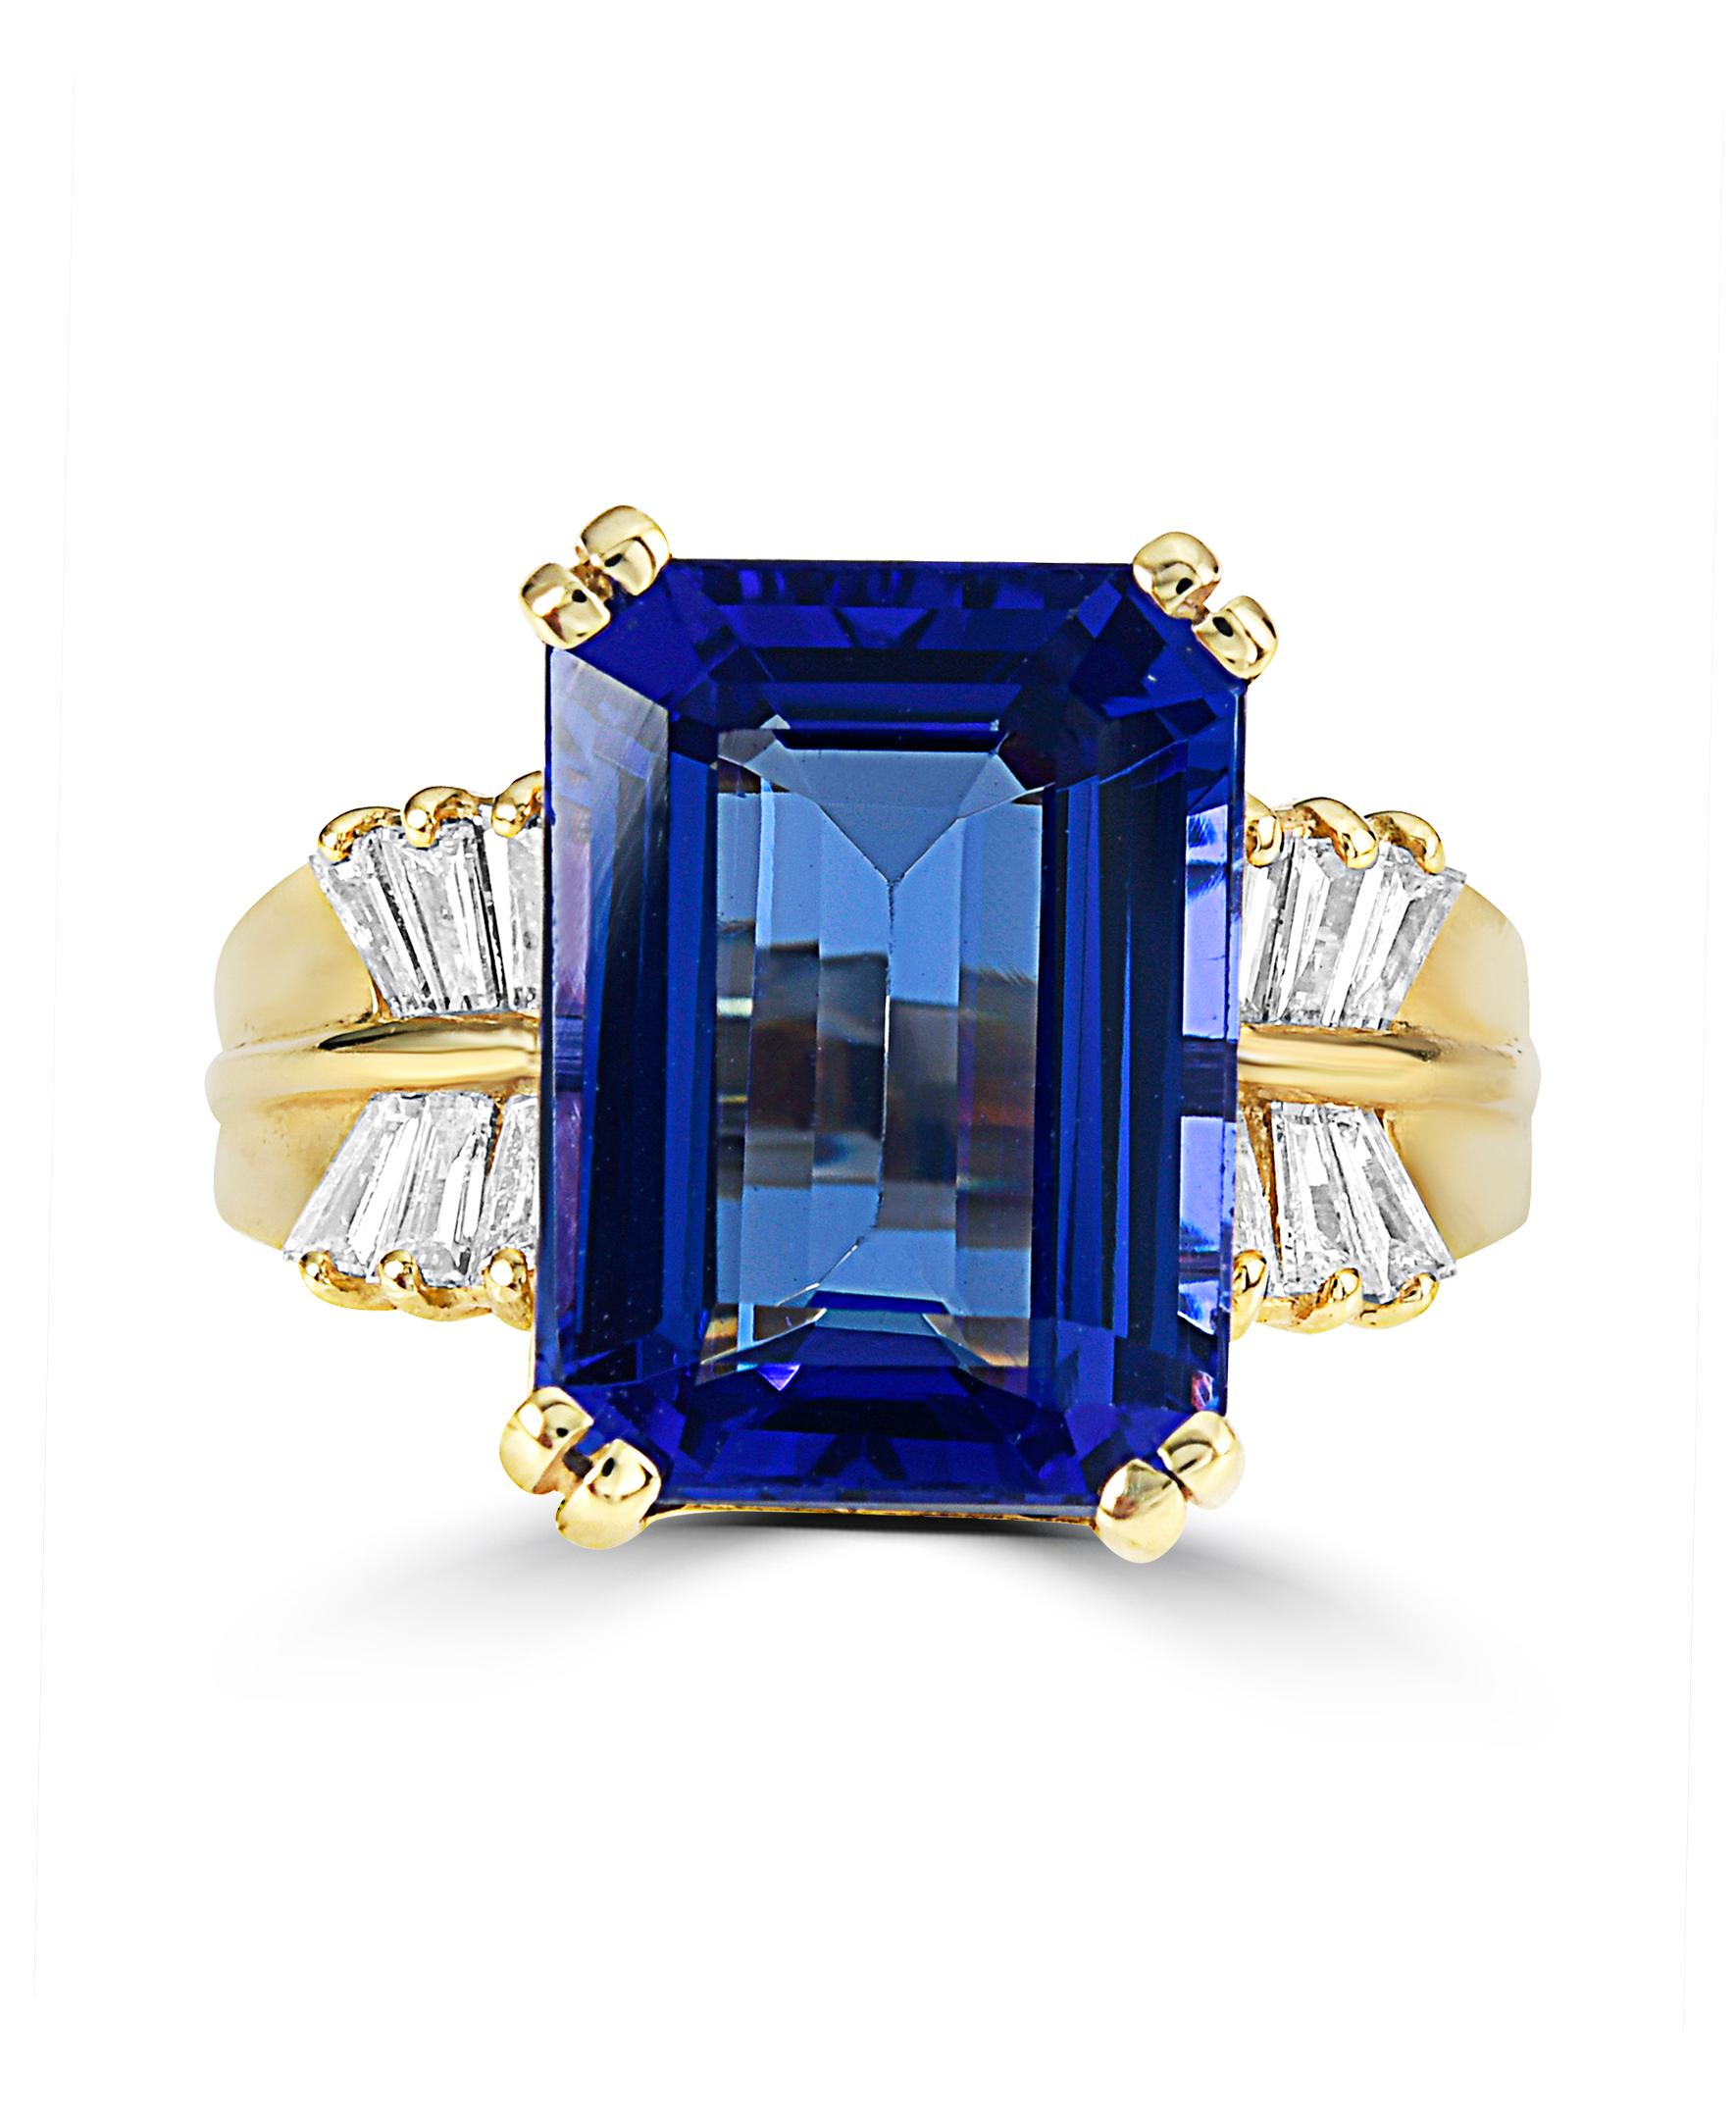 This Effy design ring is set in 18K Yellow gold. The design is set off with an Emerald cut Tanzanite, with a total weight of 9.16ct.
The diamond accent stones are baguette in shape and the total weight is 0.41ct.
This ring is a sizable 7. 
The item